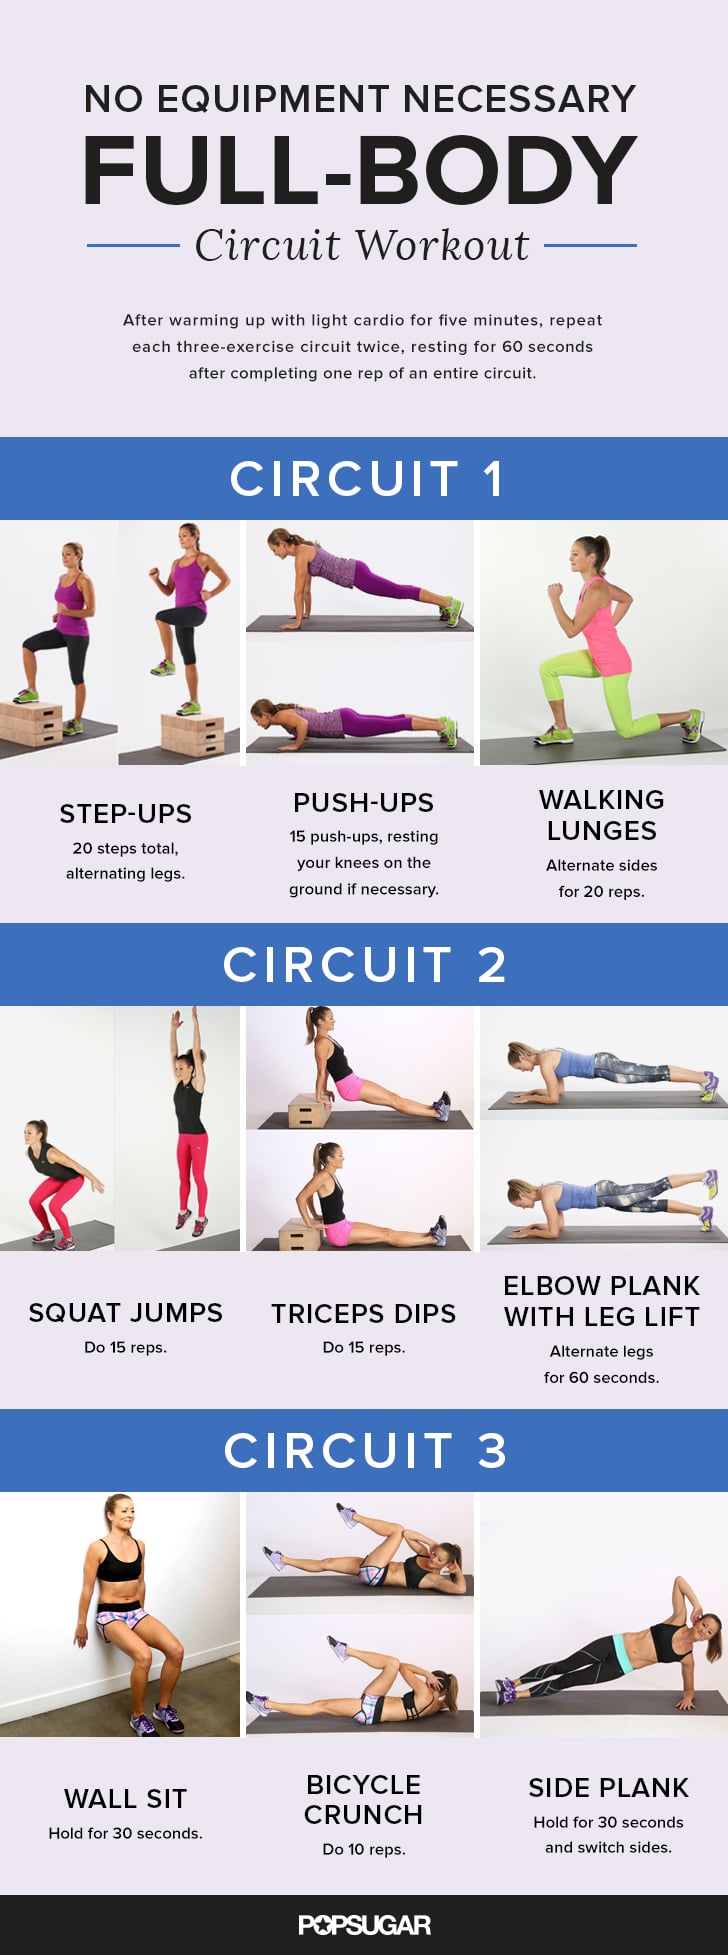 Full Body Circuit Workout to Strengthen Legs, Abs, and ...